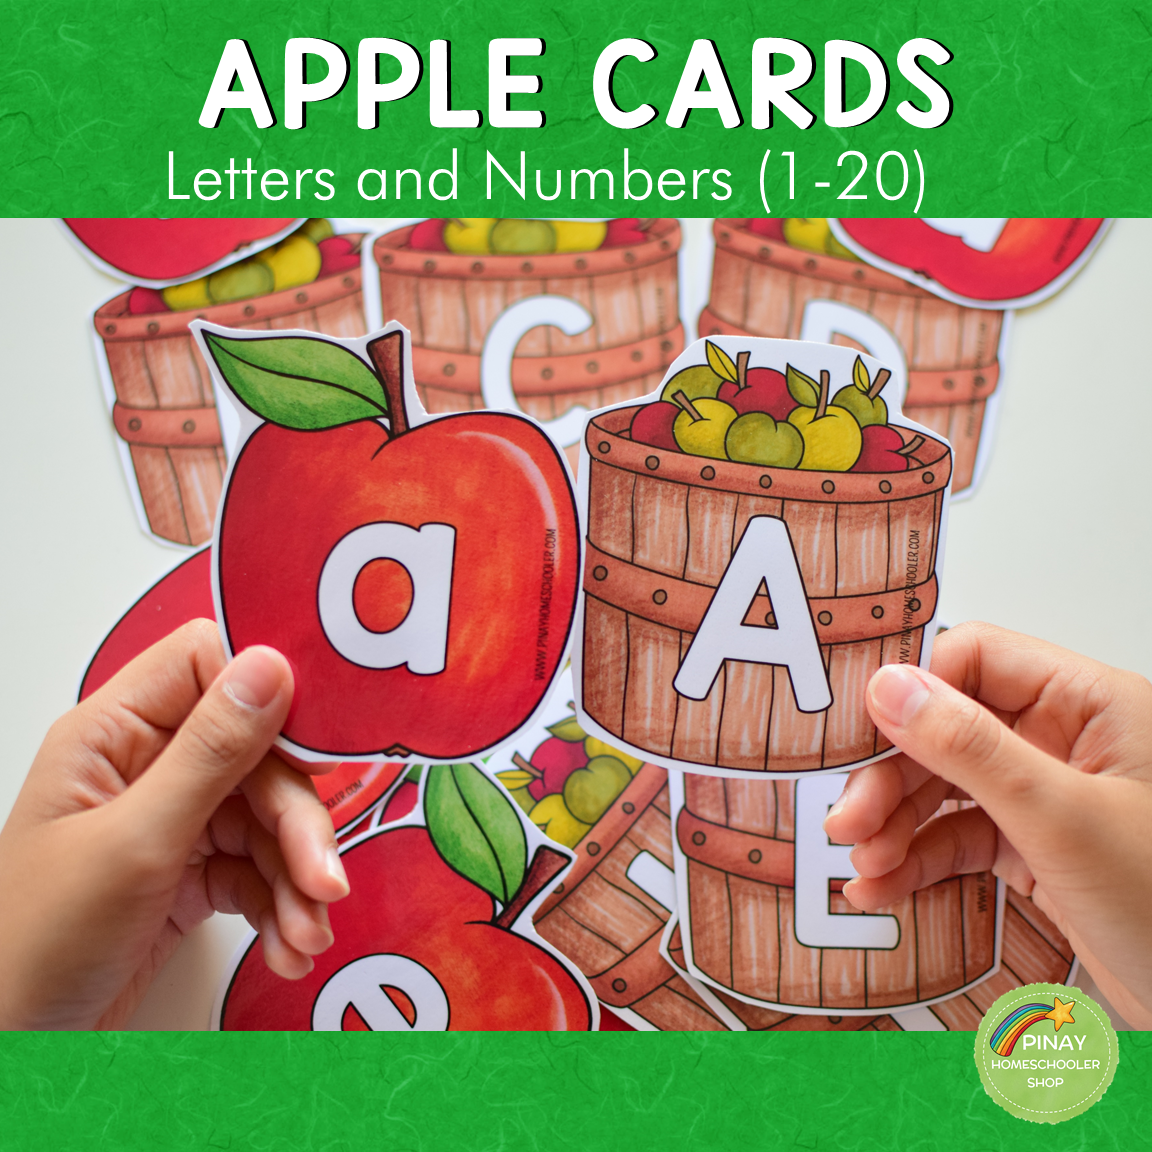 Apple Letter and Number Cards